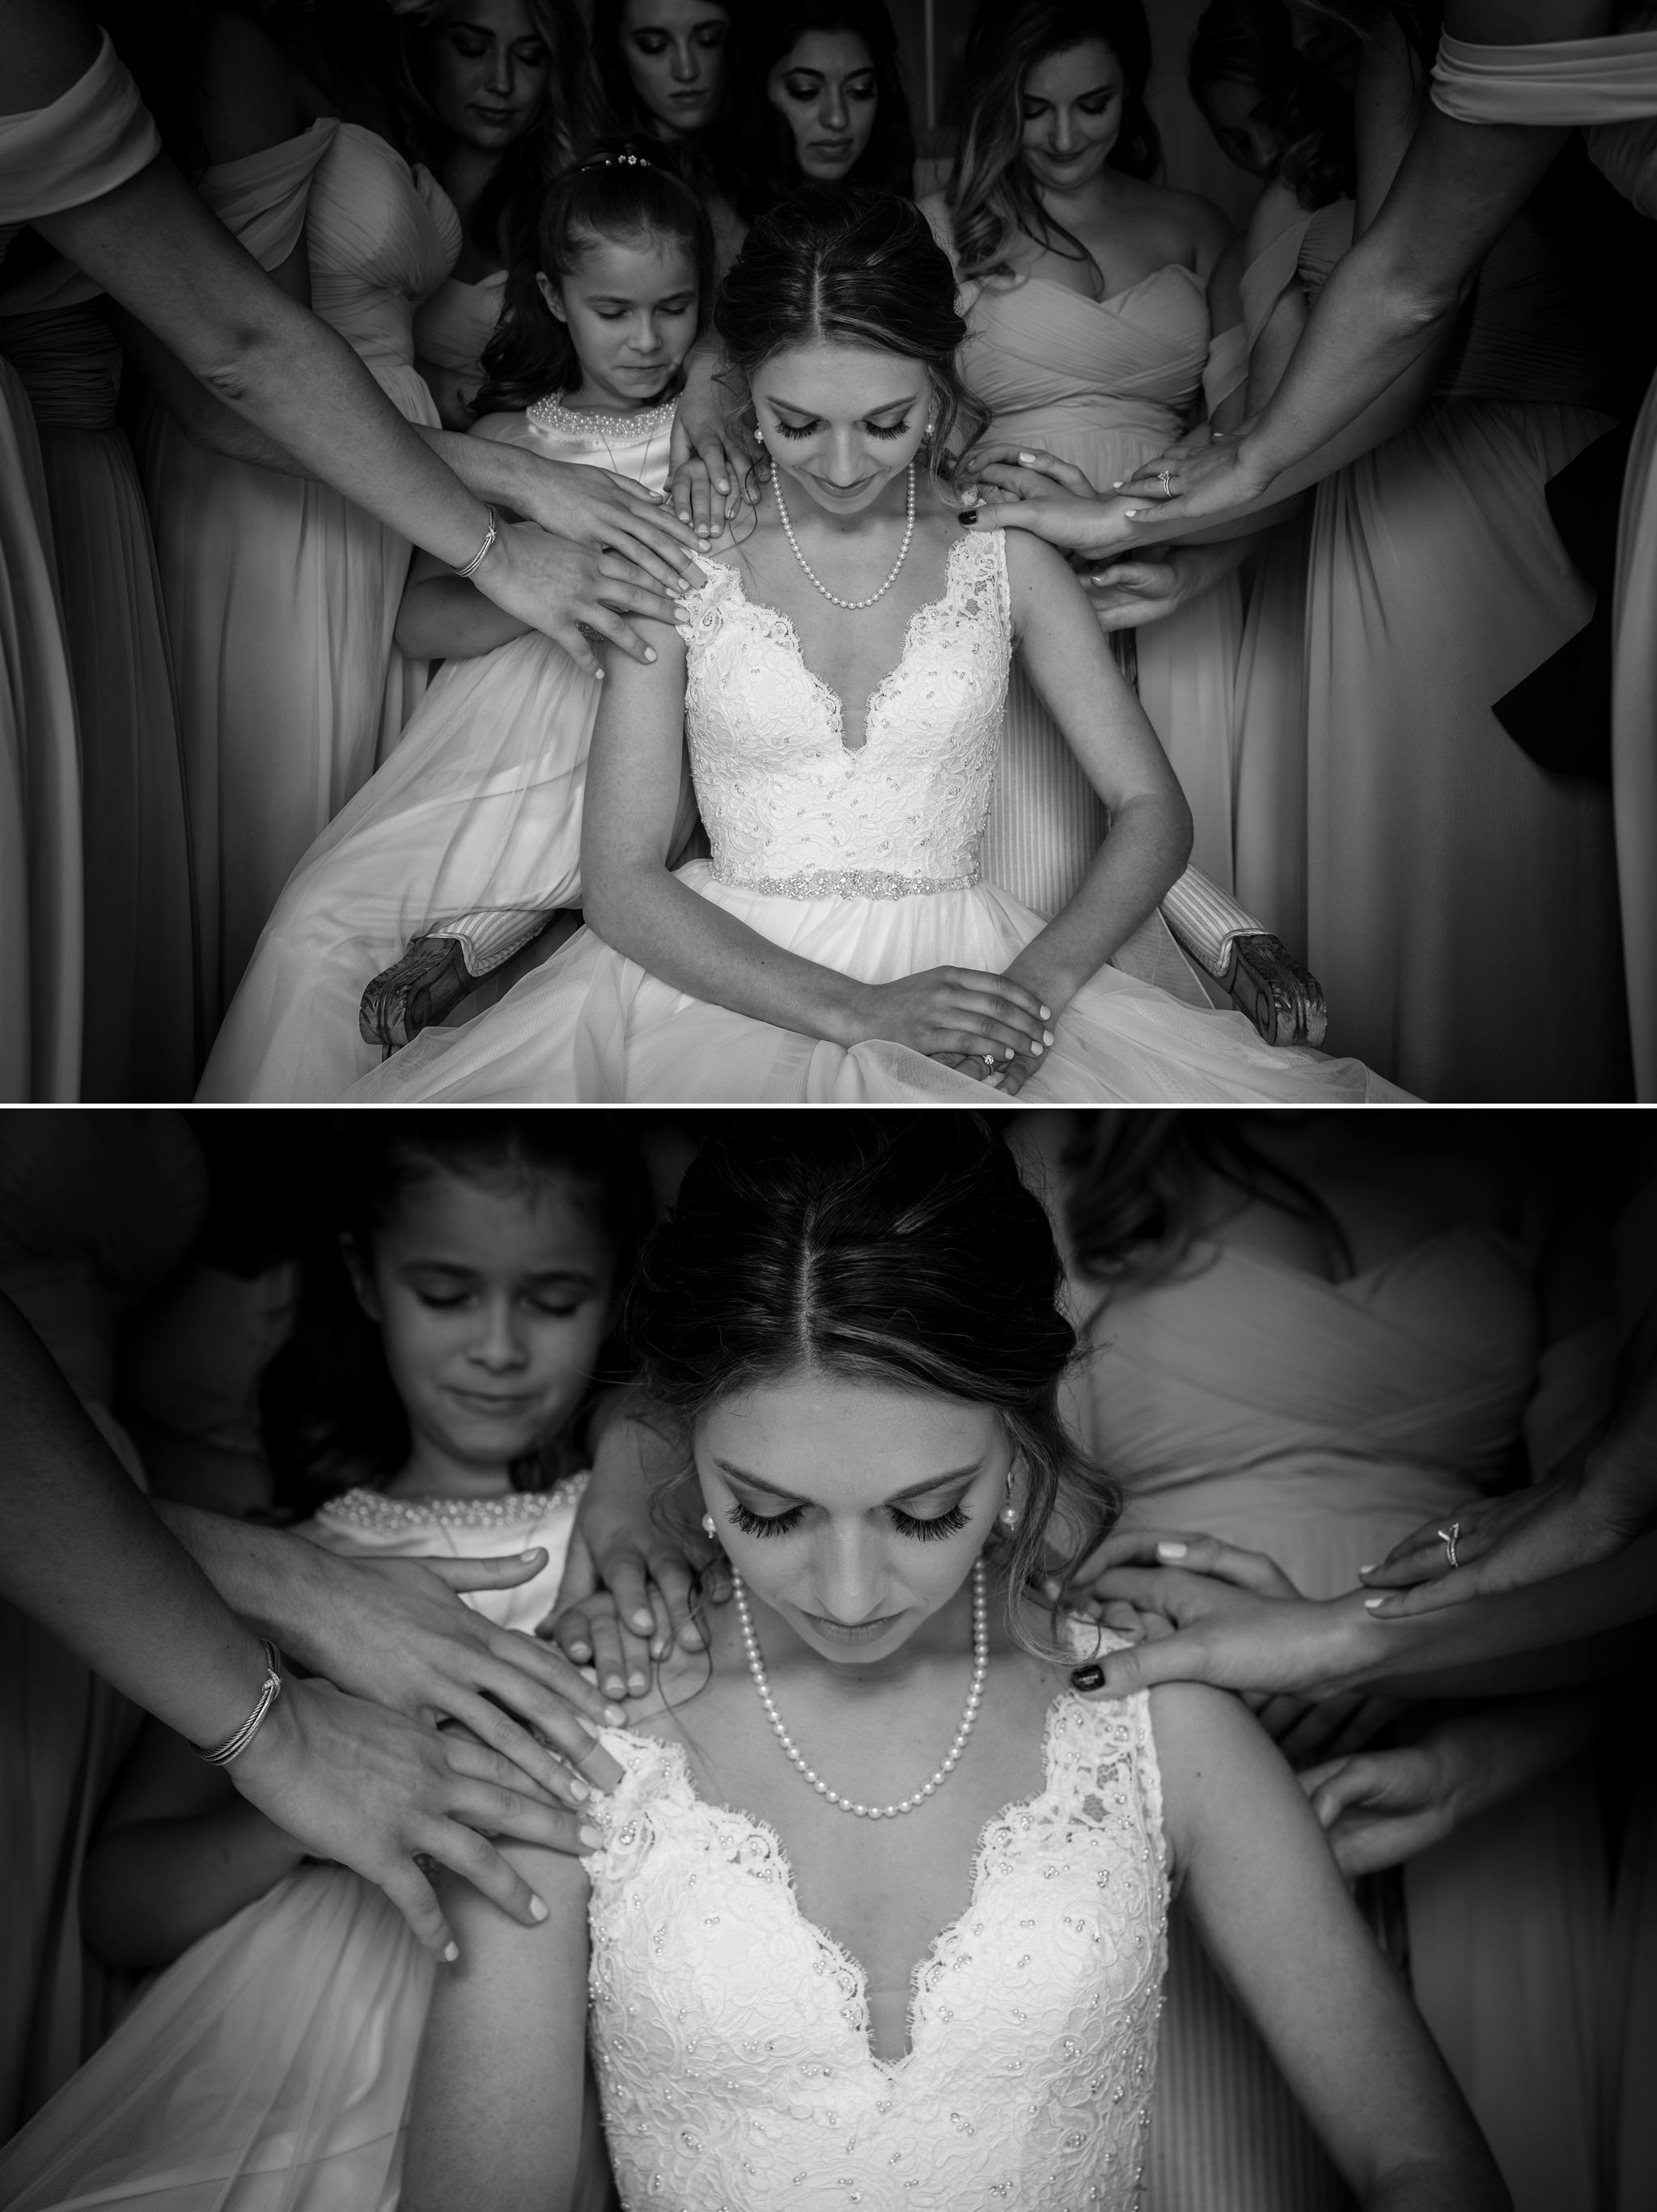 praying over the bride on her wedding day